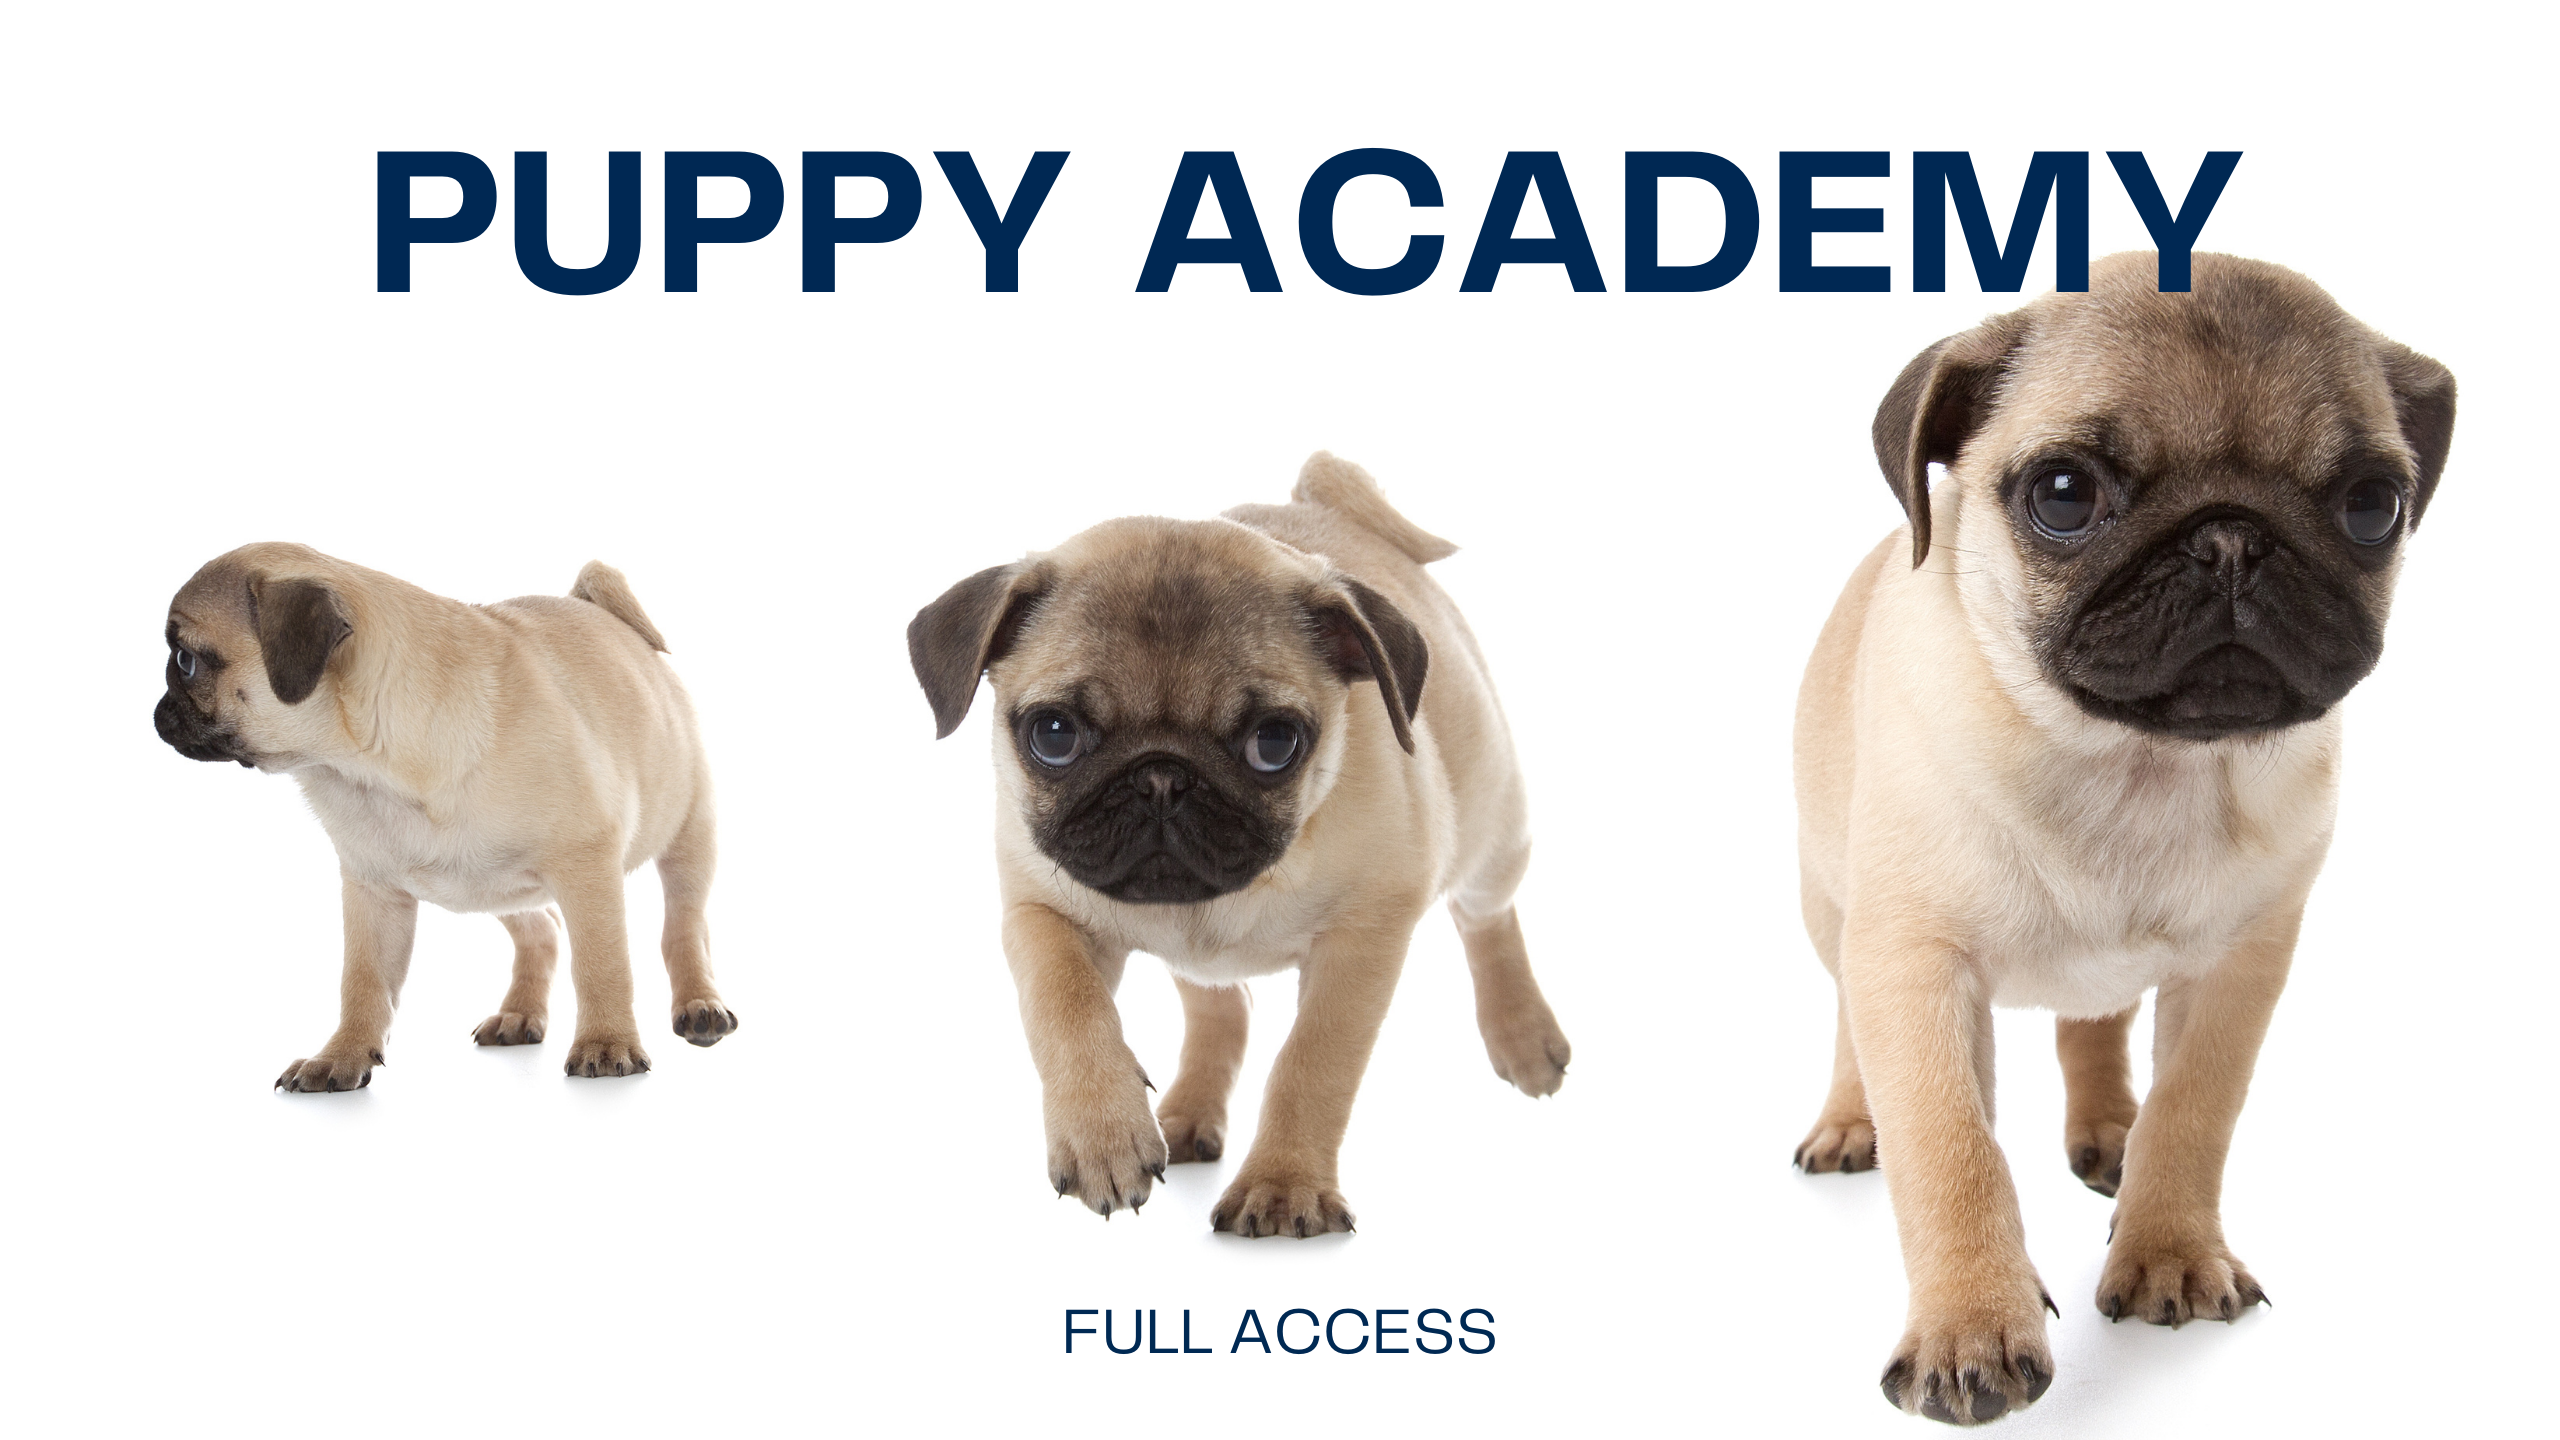 Online puppy training academy courses and coaching logo Newman's Dog Training